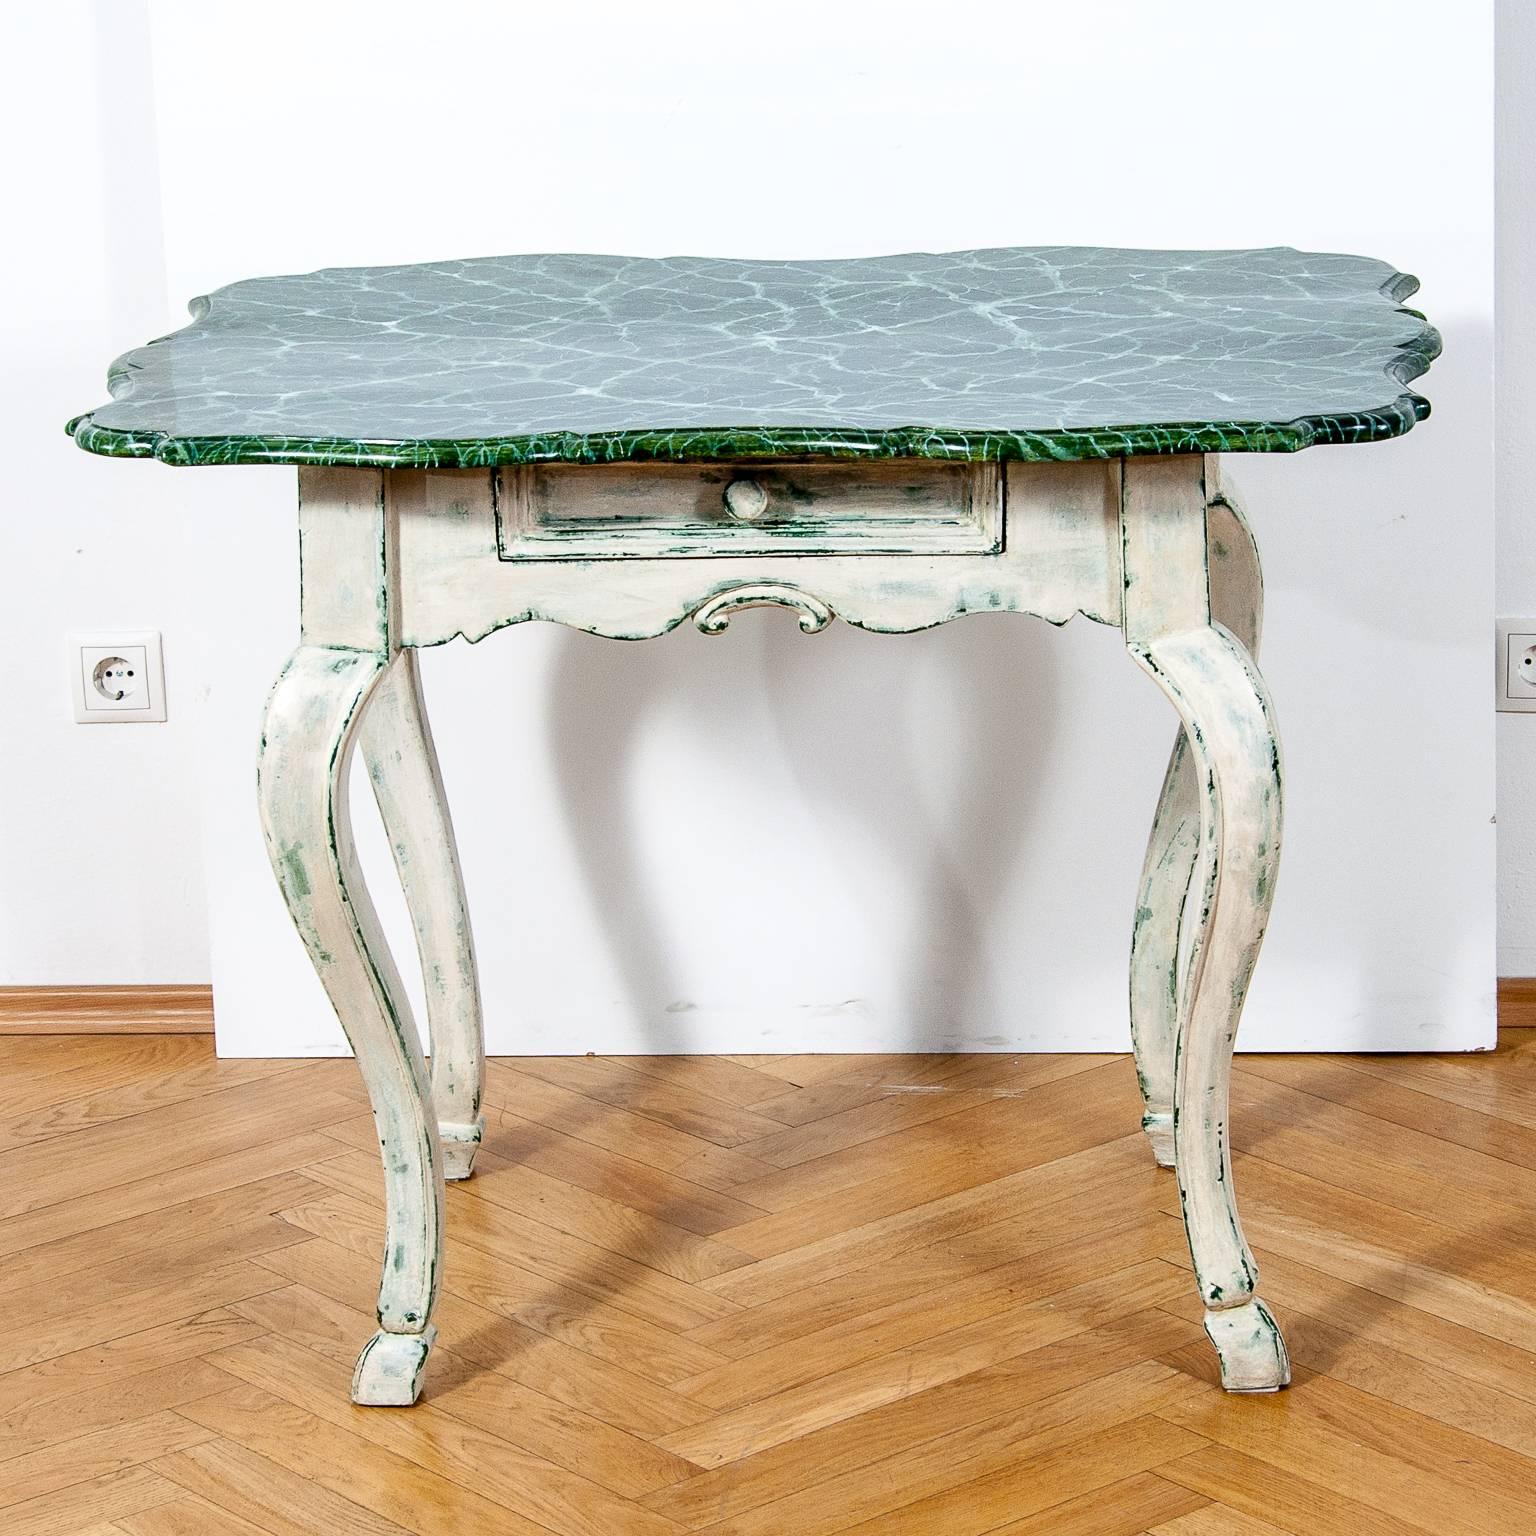 An elegant hand-carved 19th-century walnut wooden Baroque table in the style of Louis XV.
The table has a new white-green washed finish in the Gustavian manner.
The top of this piece is painted in beautiful marble imitation called „a faux marble “.